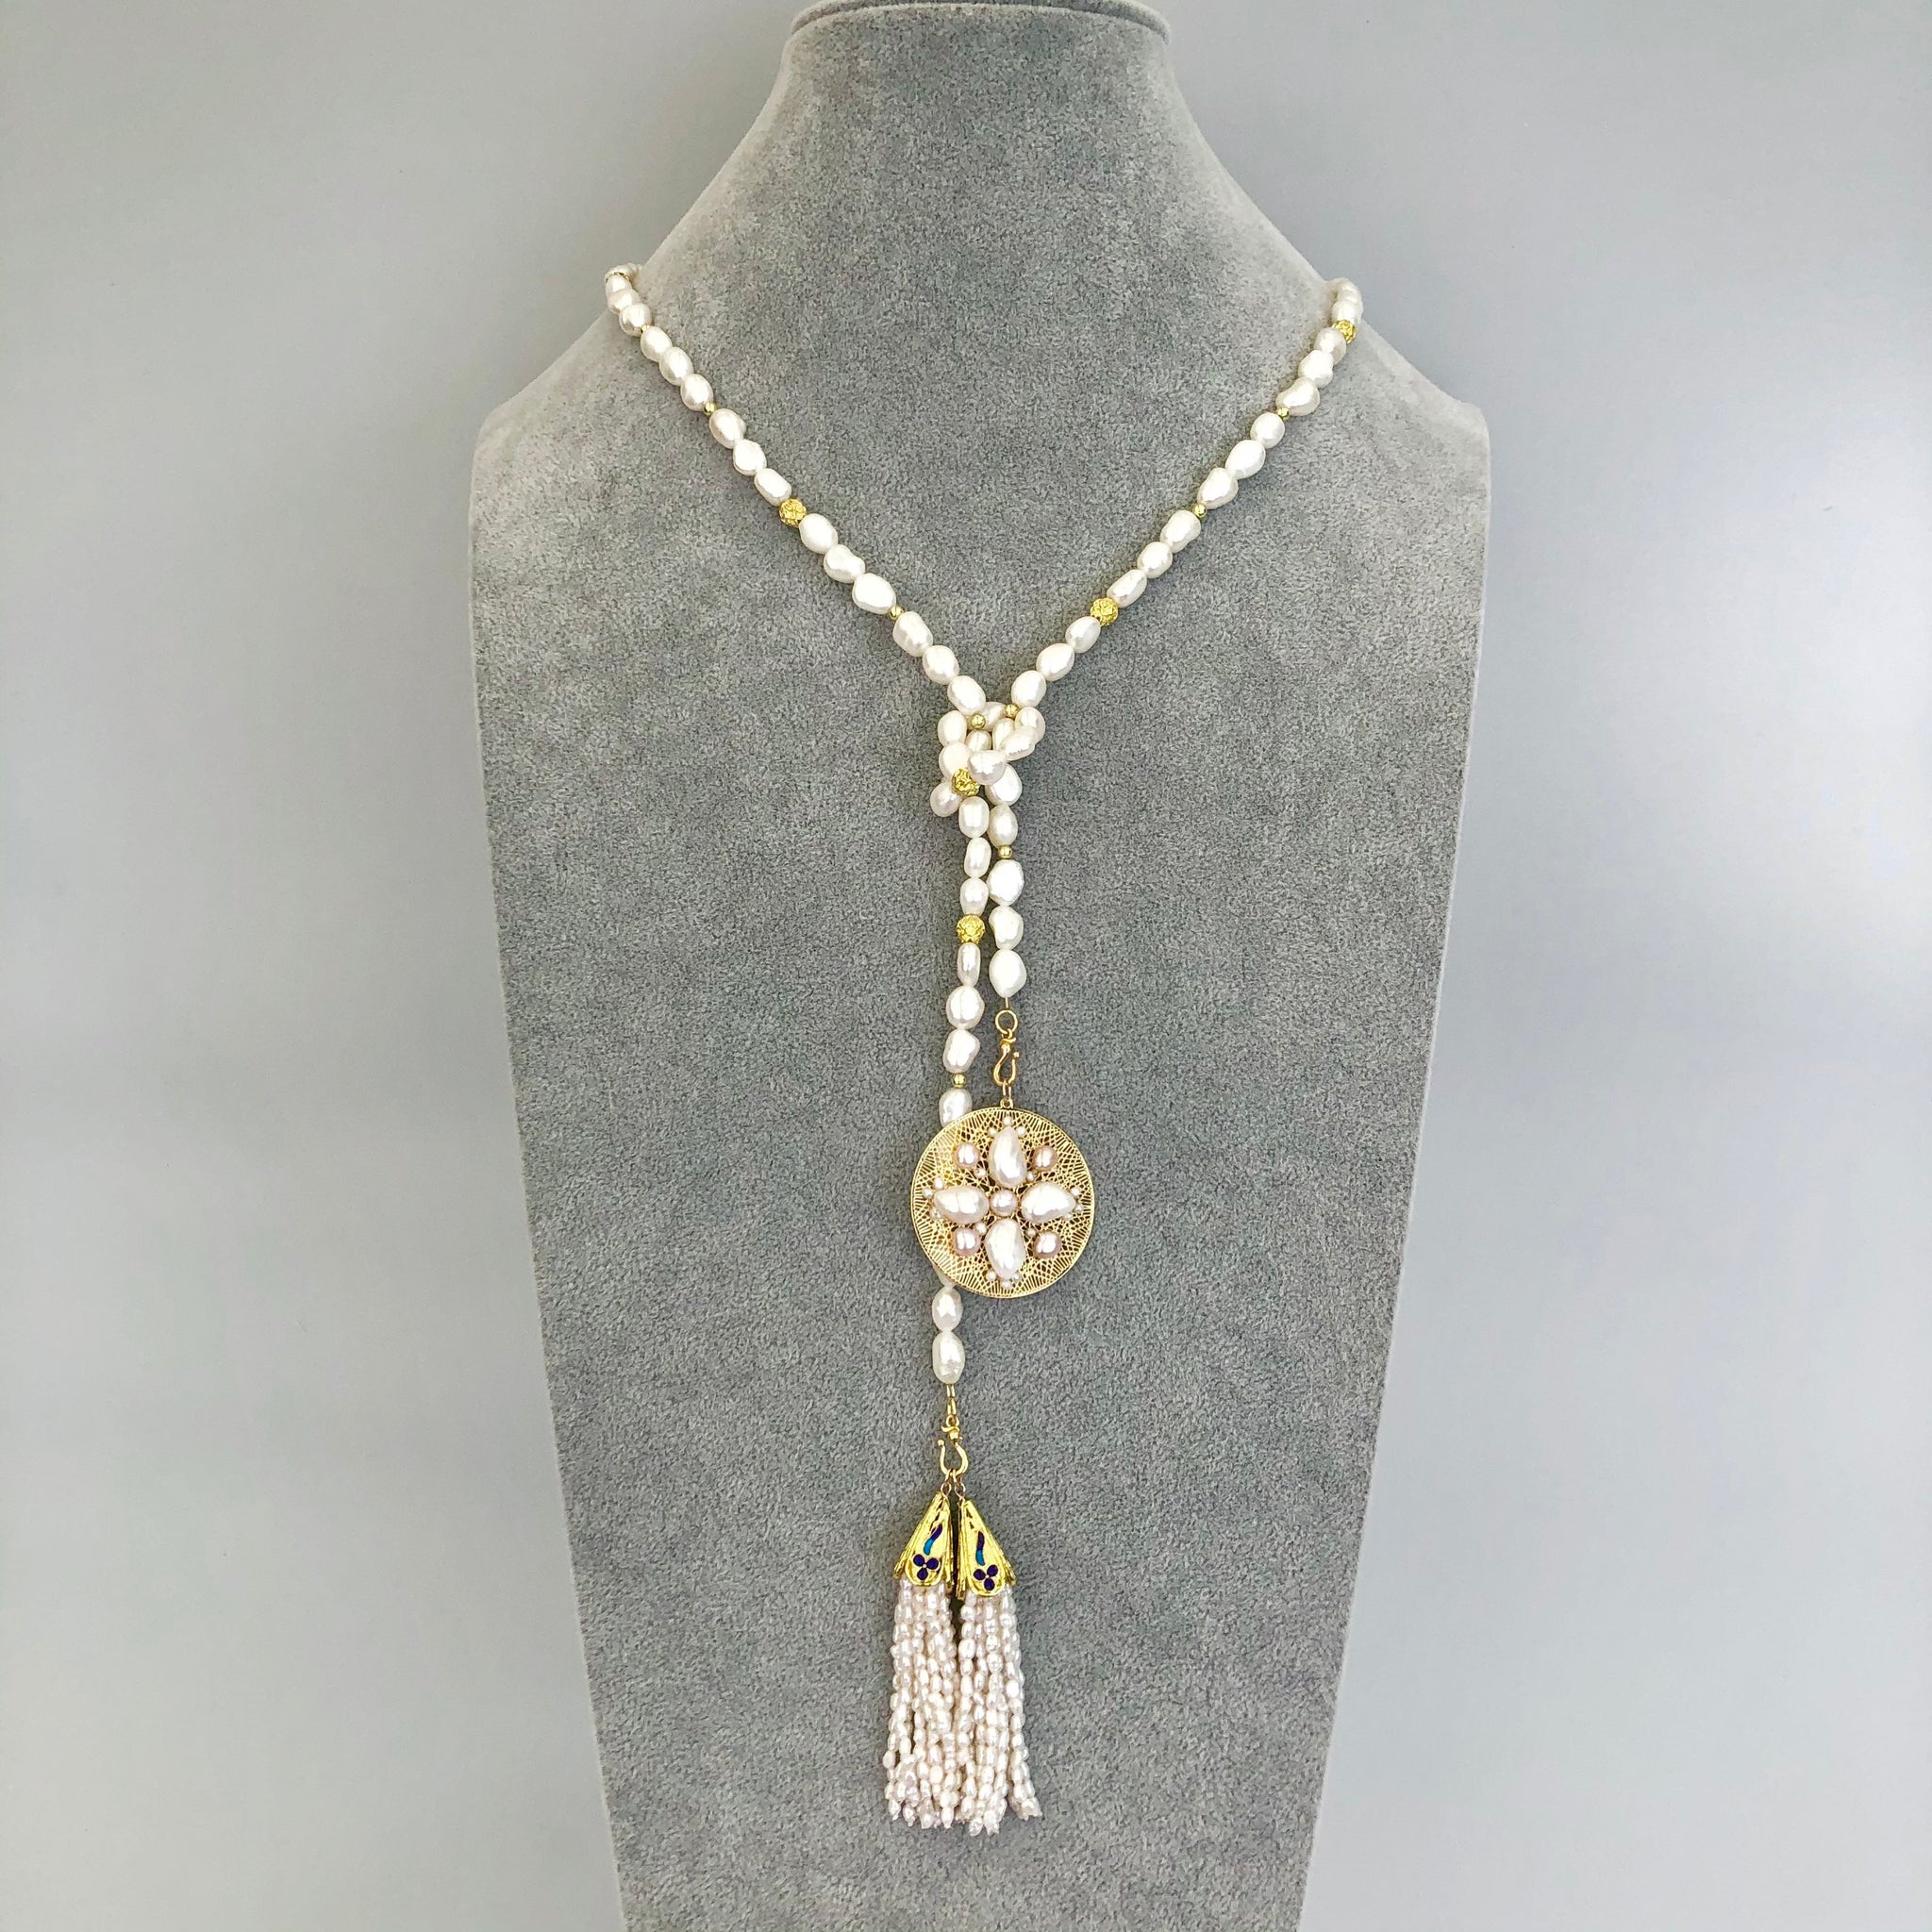 New | from Multi-style Boutique Yun Boutique Necklace Jewelry Baroque | York Asian Lariat Pearl Set